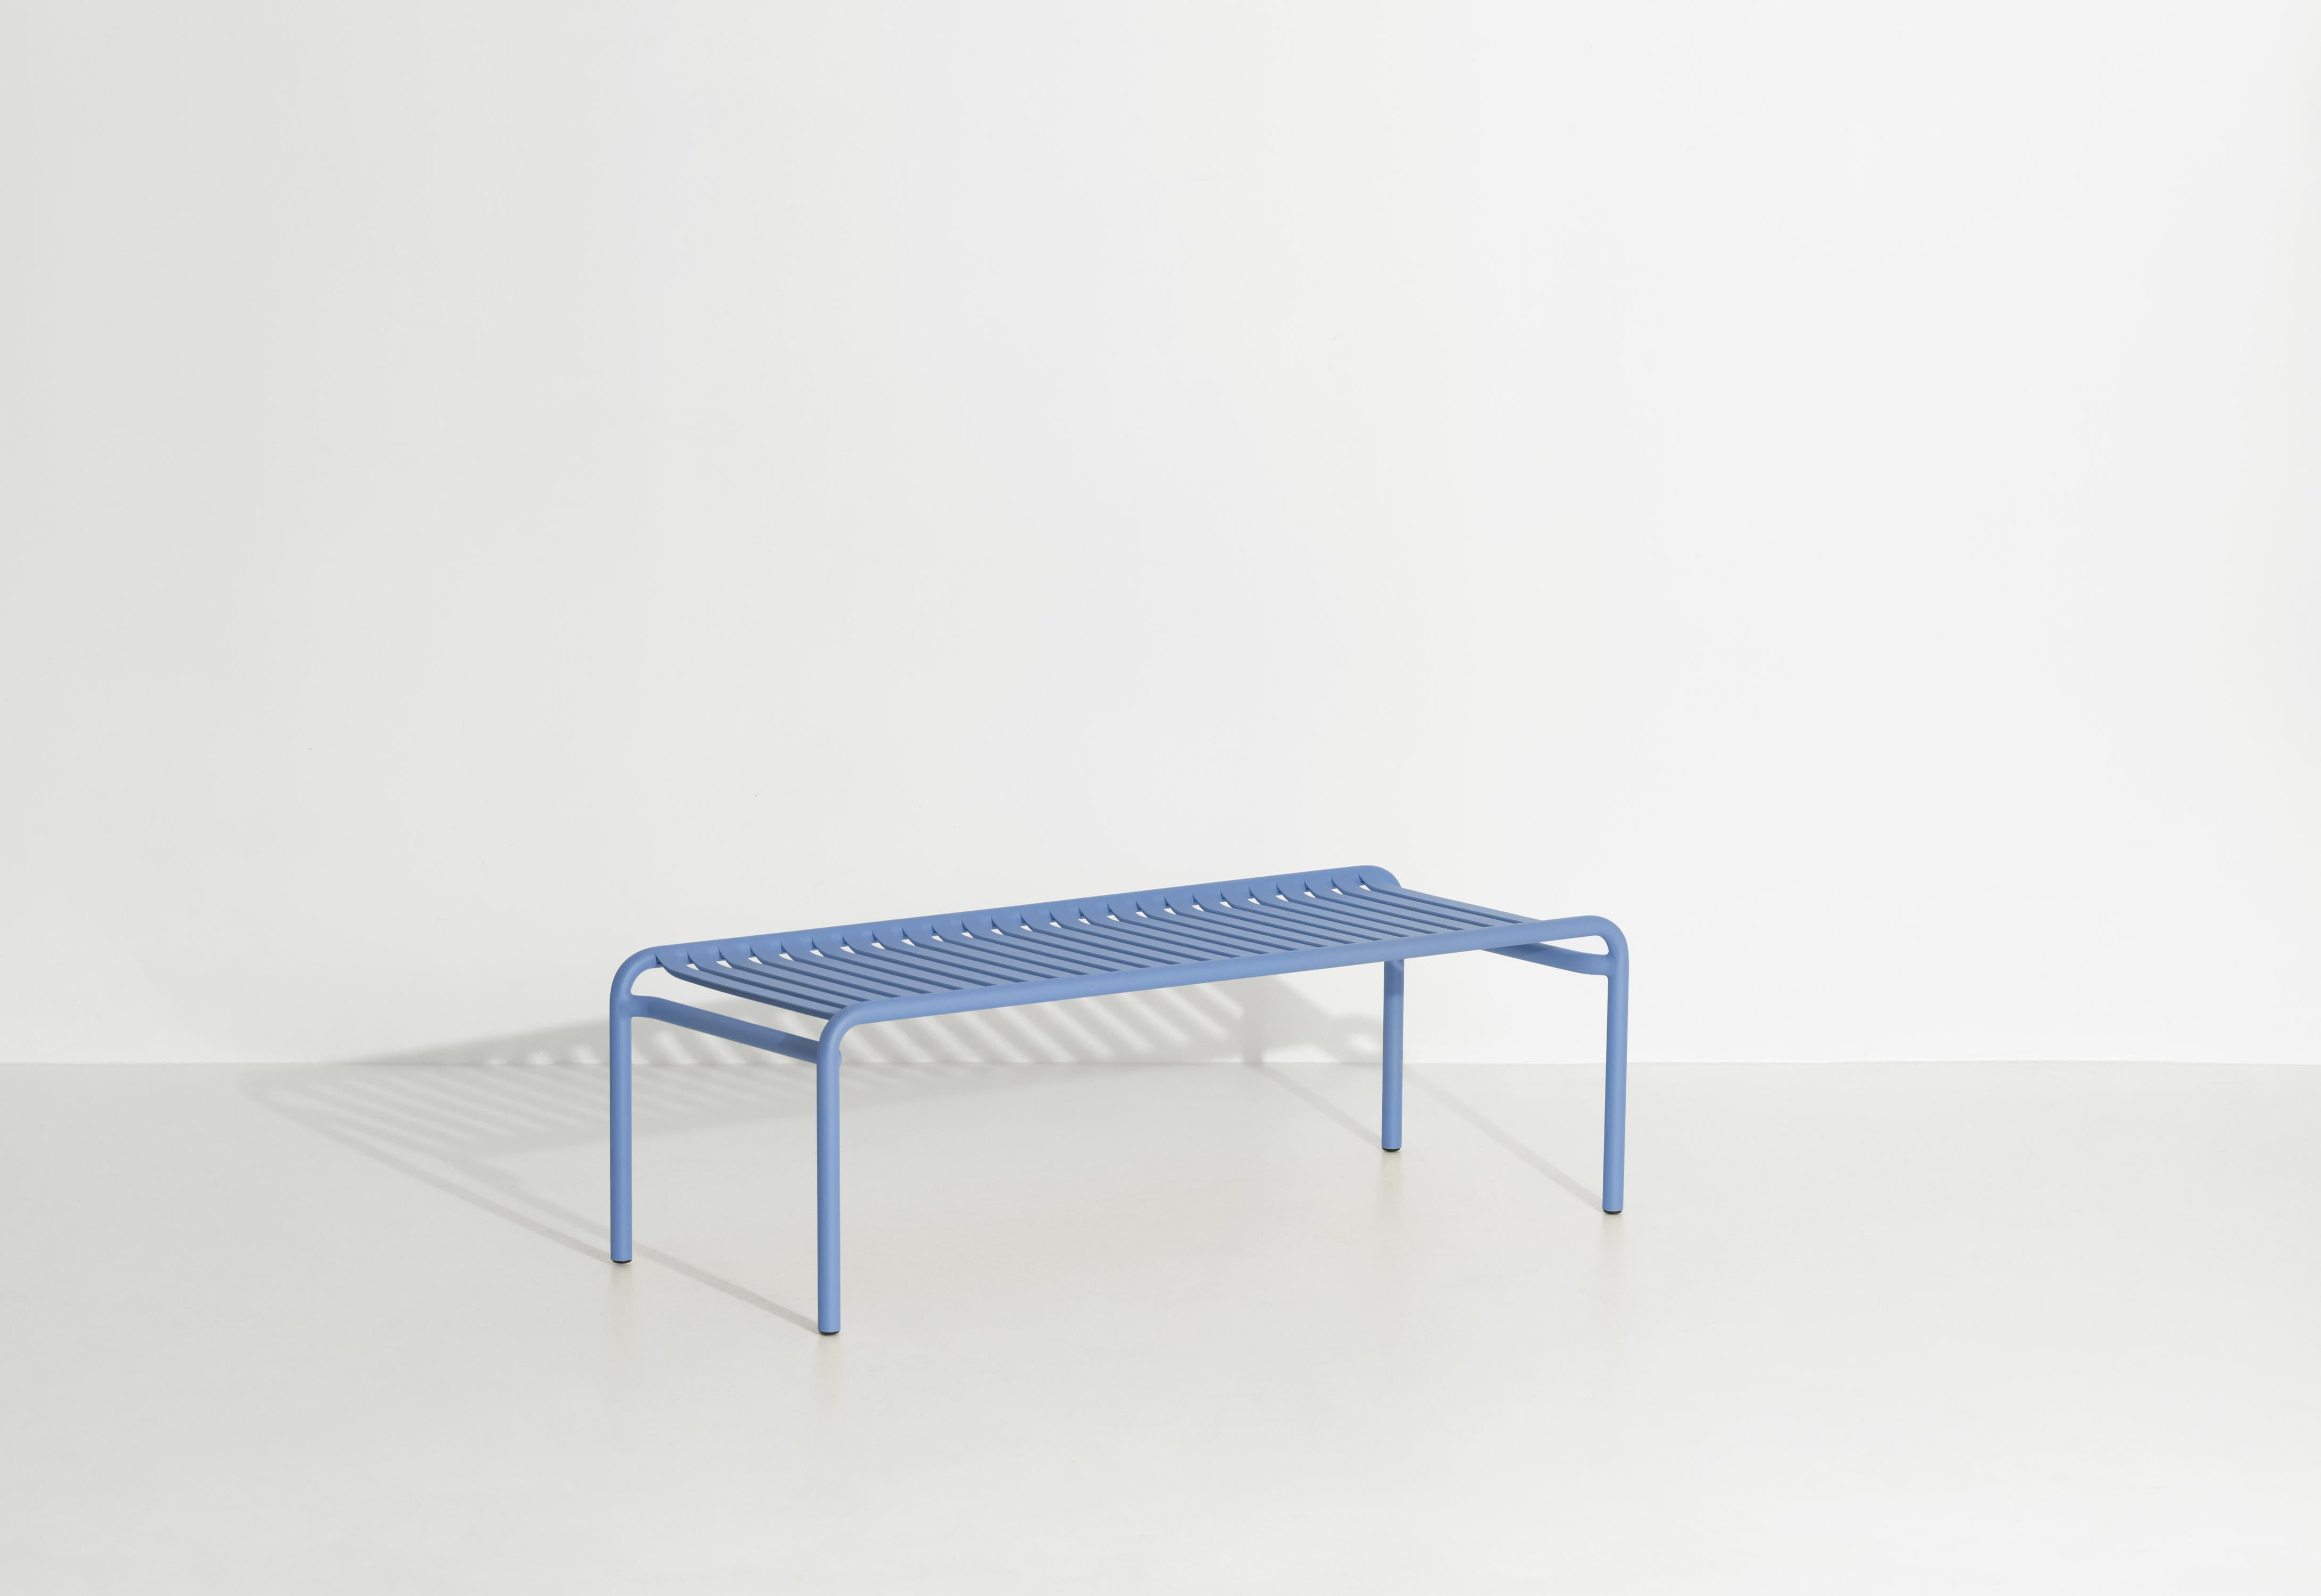 Petite Friture Week-End Long Coffee Table in Azur Blue Aluminium by Studio BrichetZiegler, 2017

The week-end collection is a full range of outdoor furniture, in aluminium grained epoxy paint, matt finish, that includes 18 functions and 8 colours